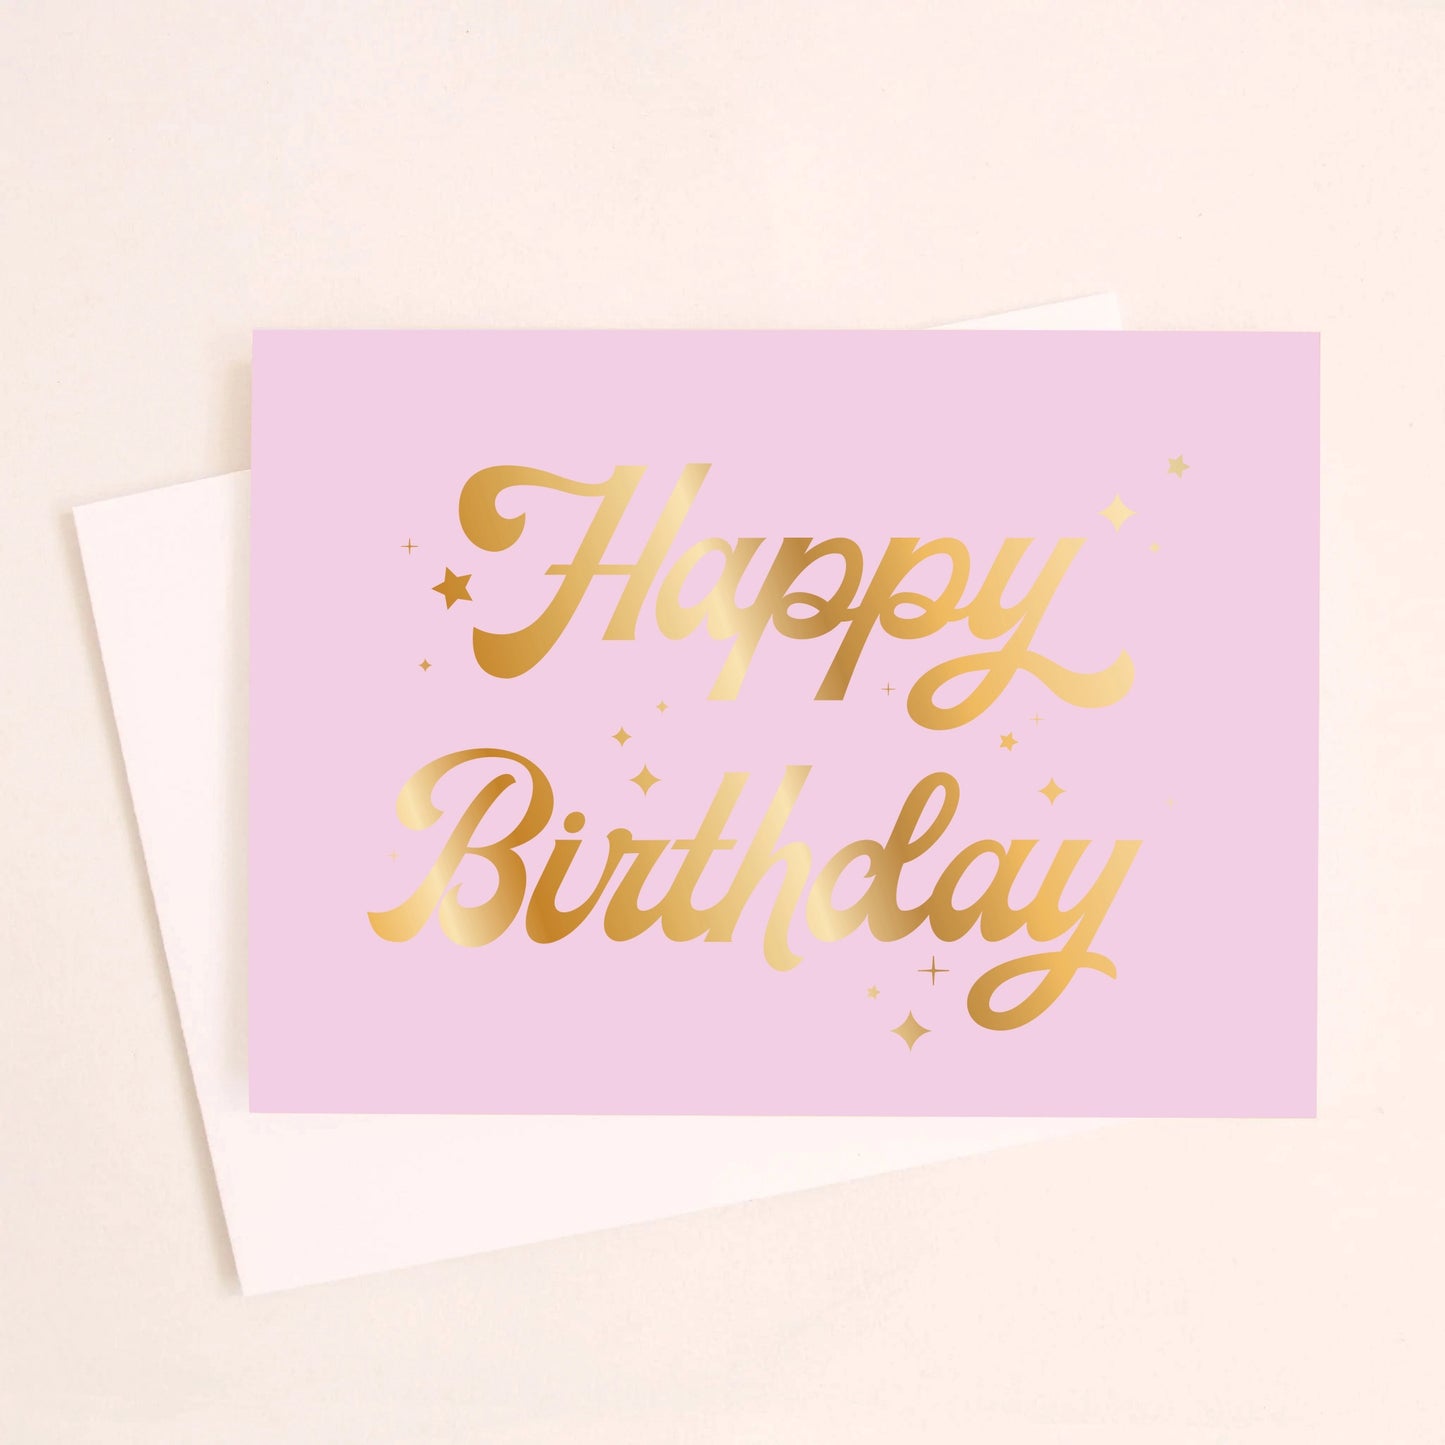 On a cream background is a lavender card with gold foiled cursive text that reads, "Happy Birthday" along with a white envelope. 